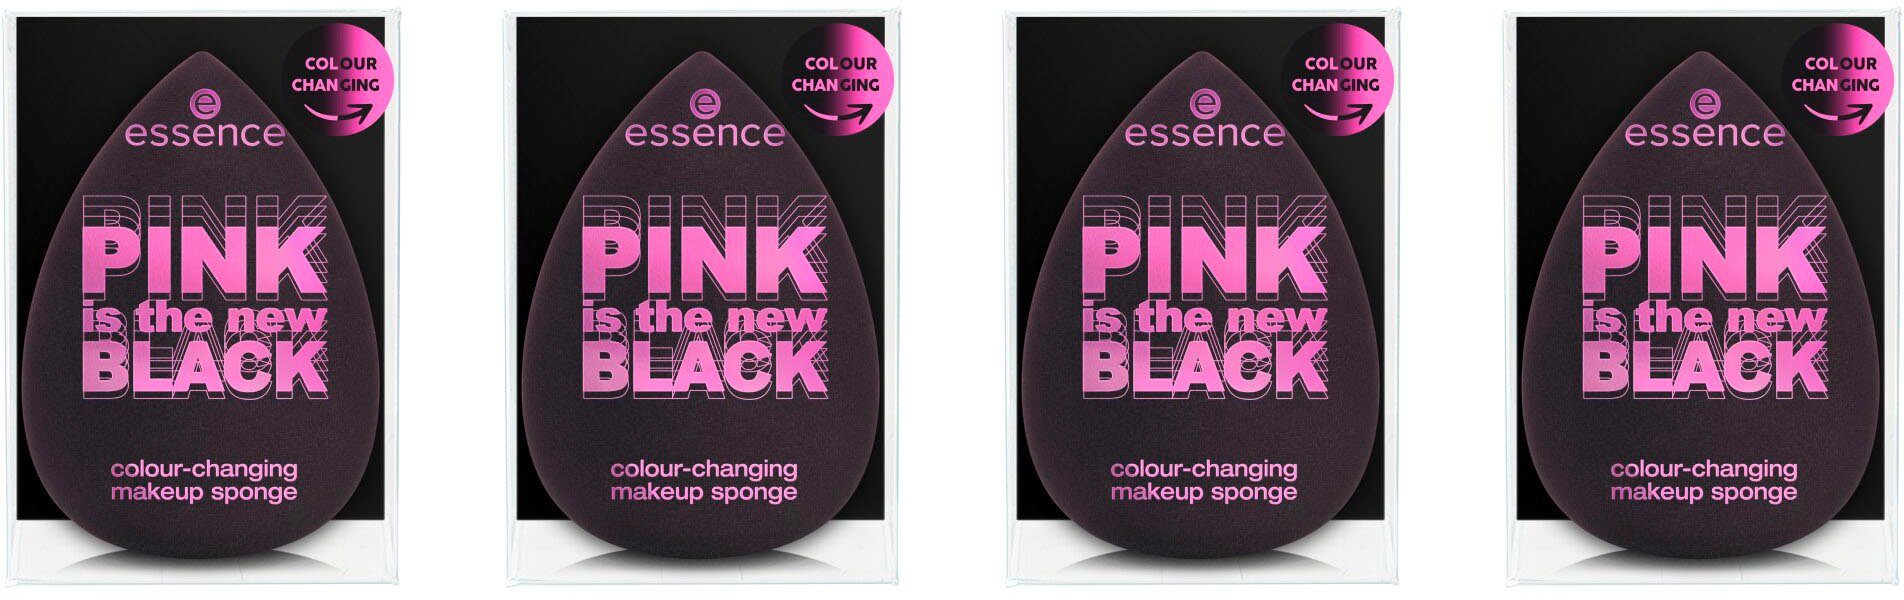 Essence Make-up Schwamm PINK makeup Colour-changing new is colour-changing the sponge, BLACK